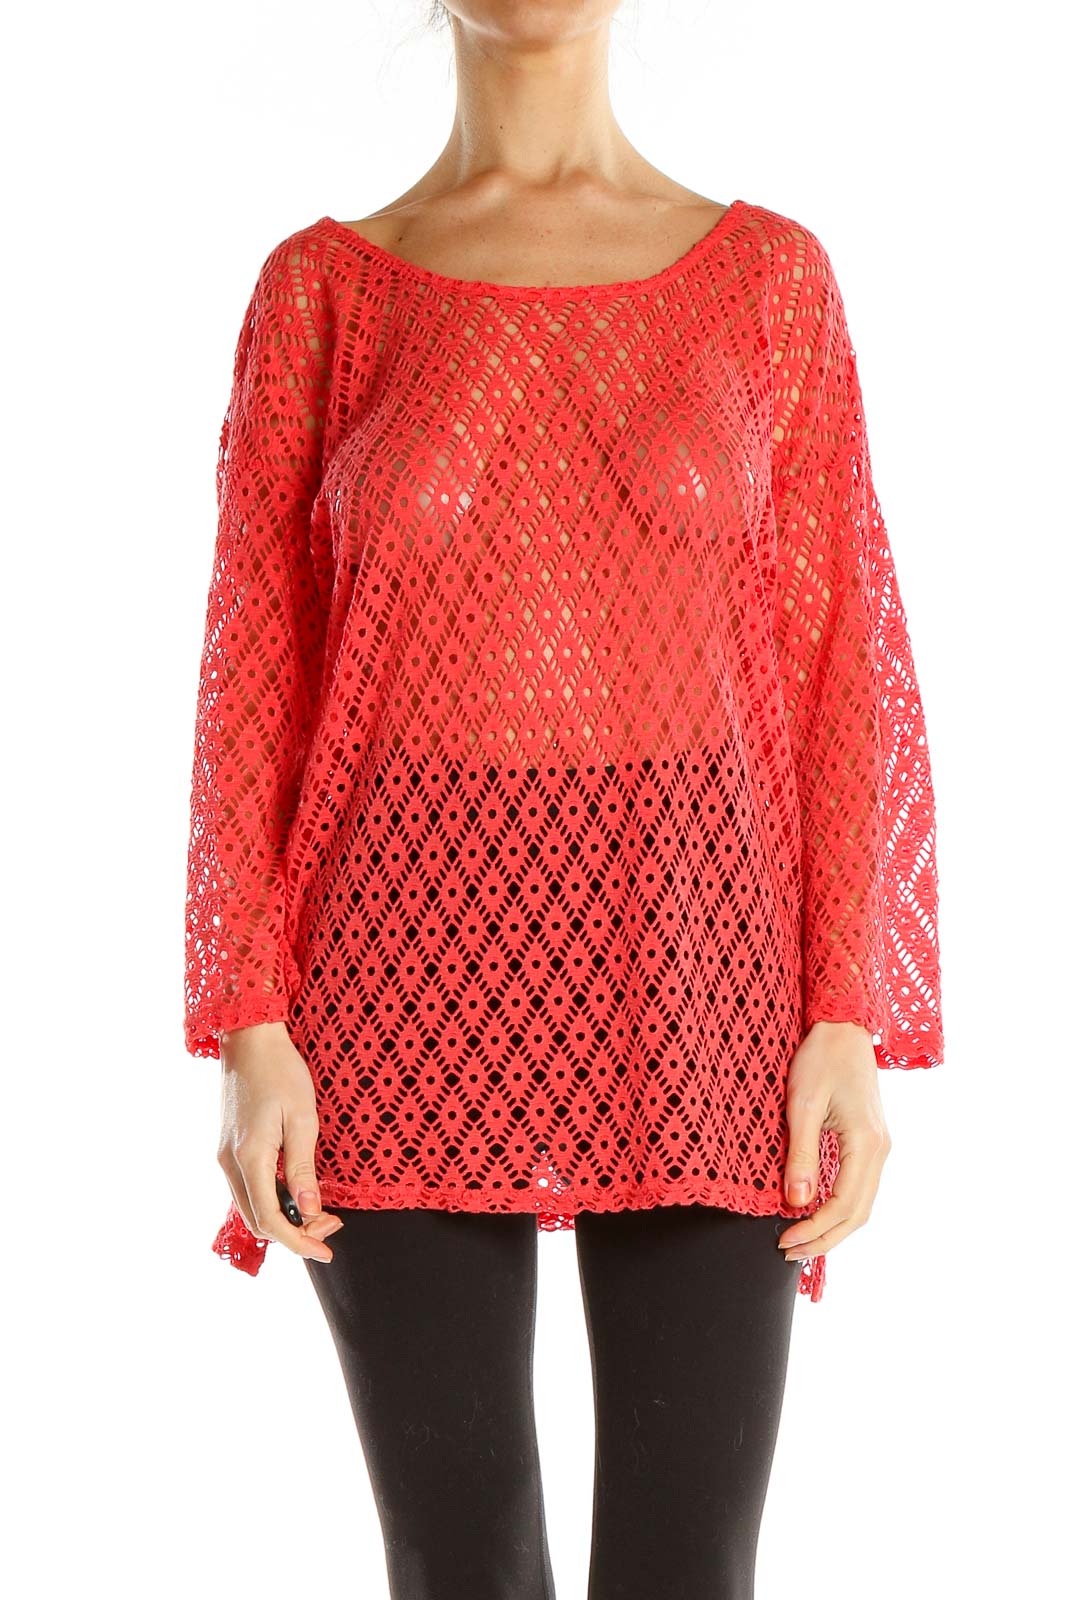 Red Textured Mesh Top Front